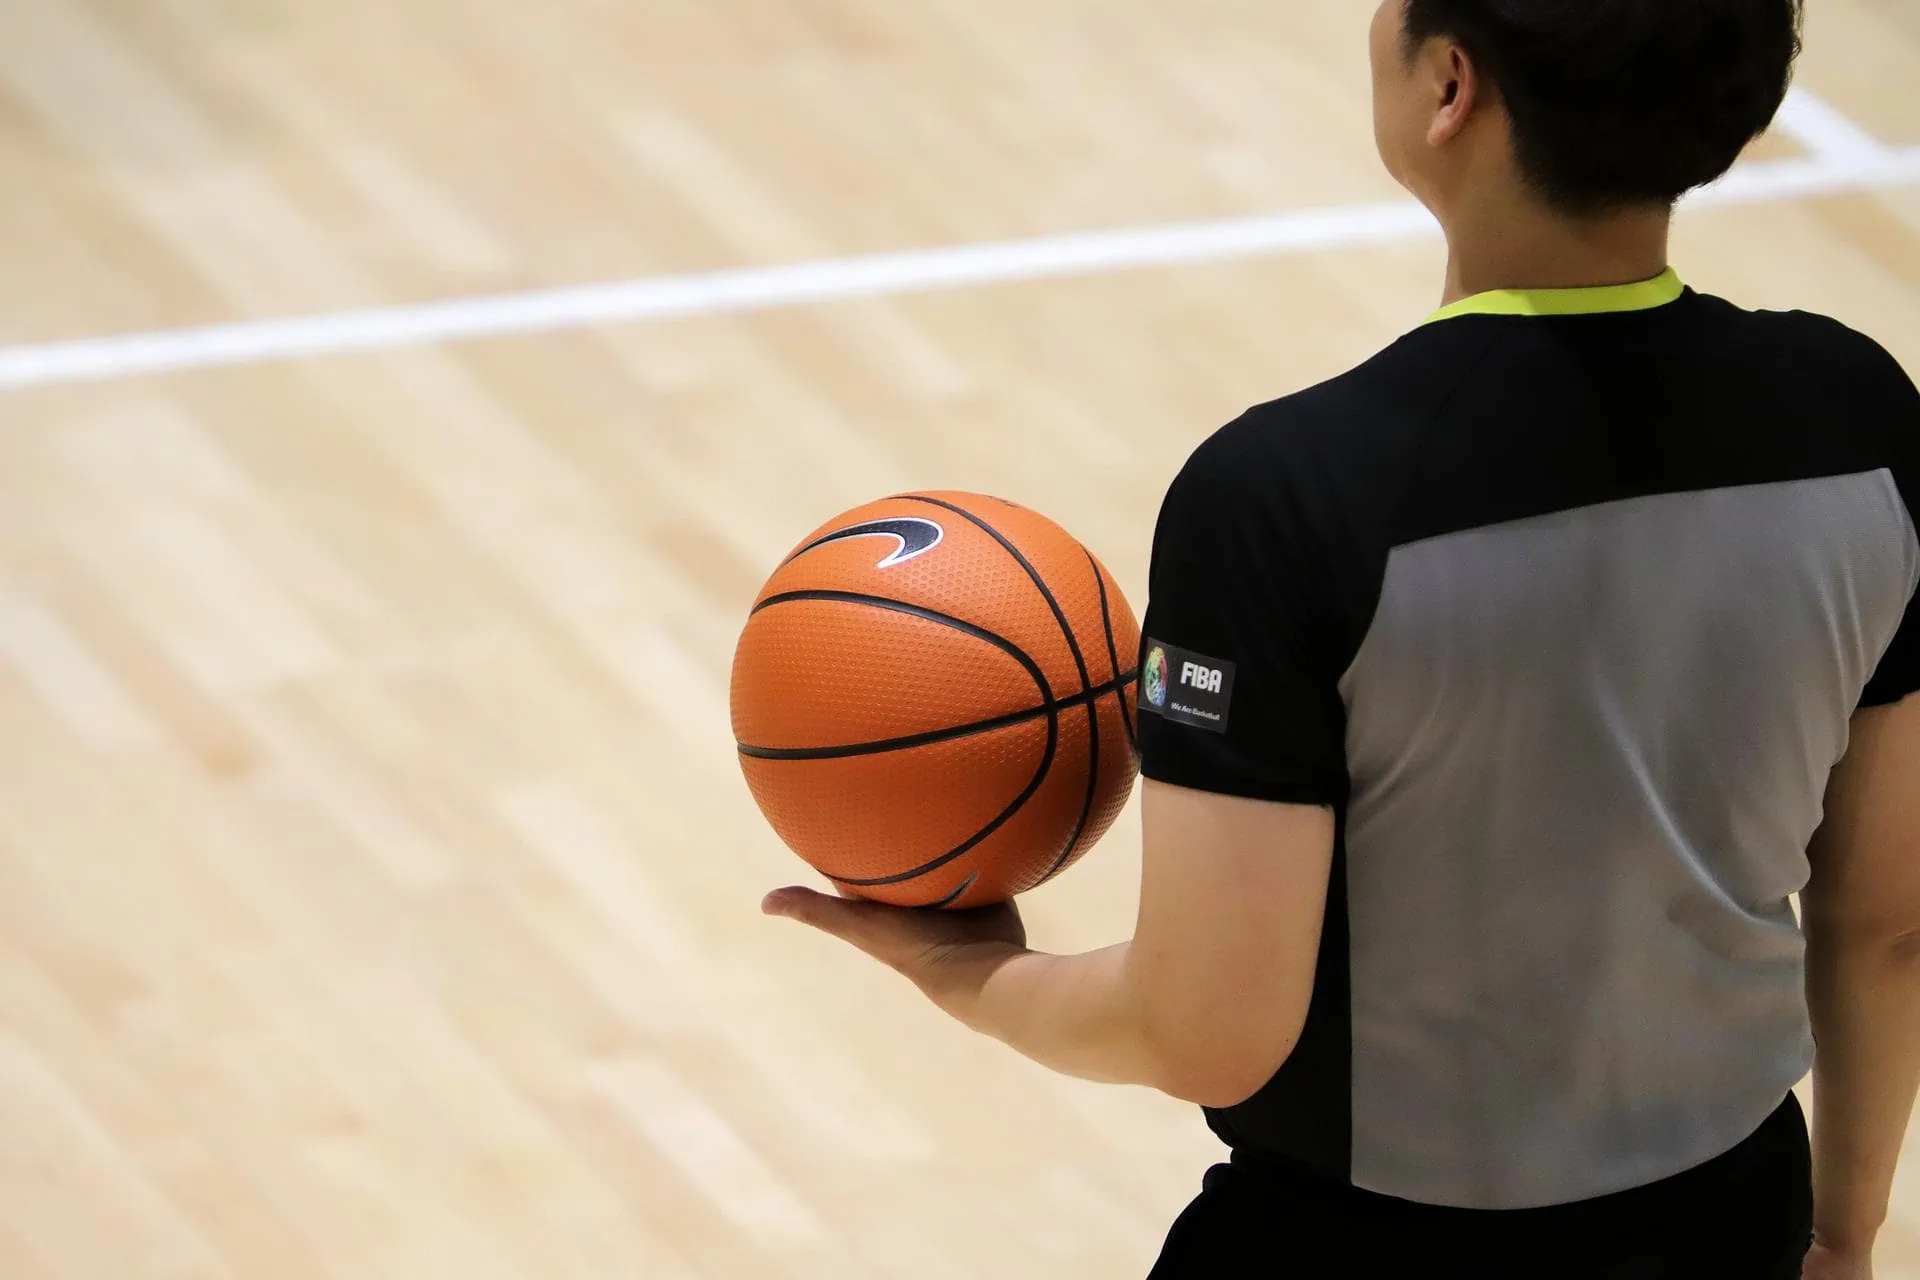 How to Referee a Basketball Game